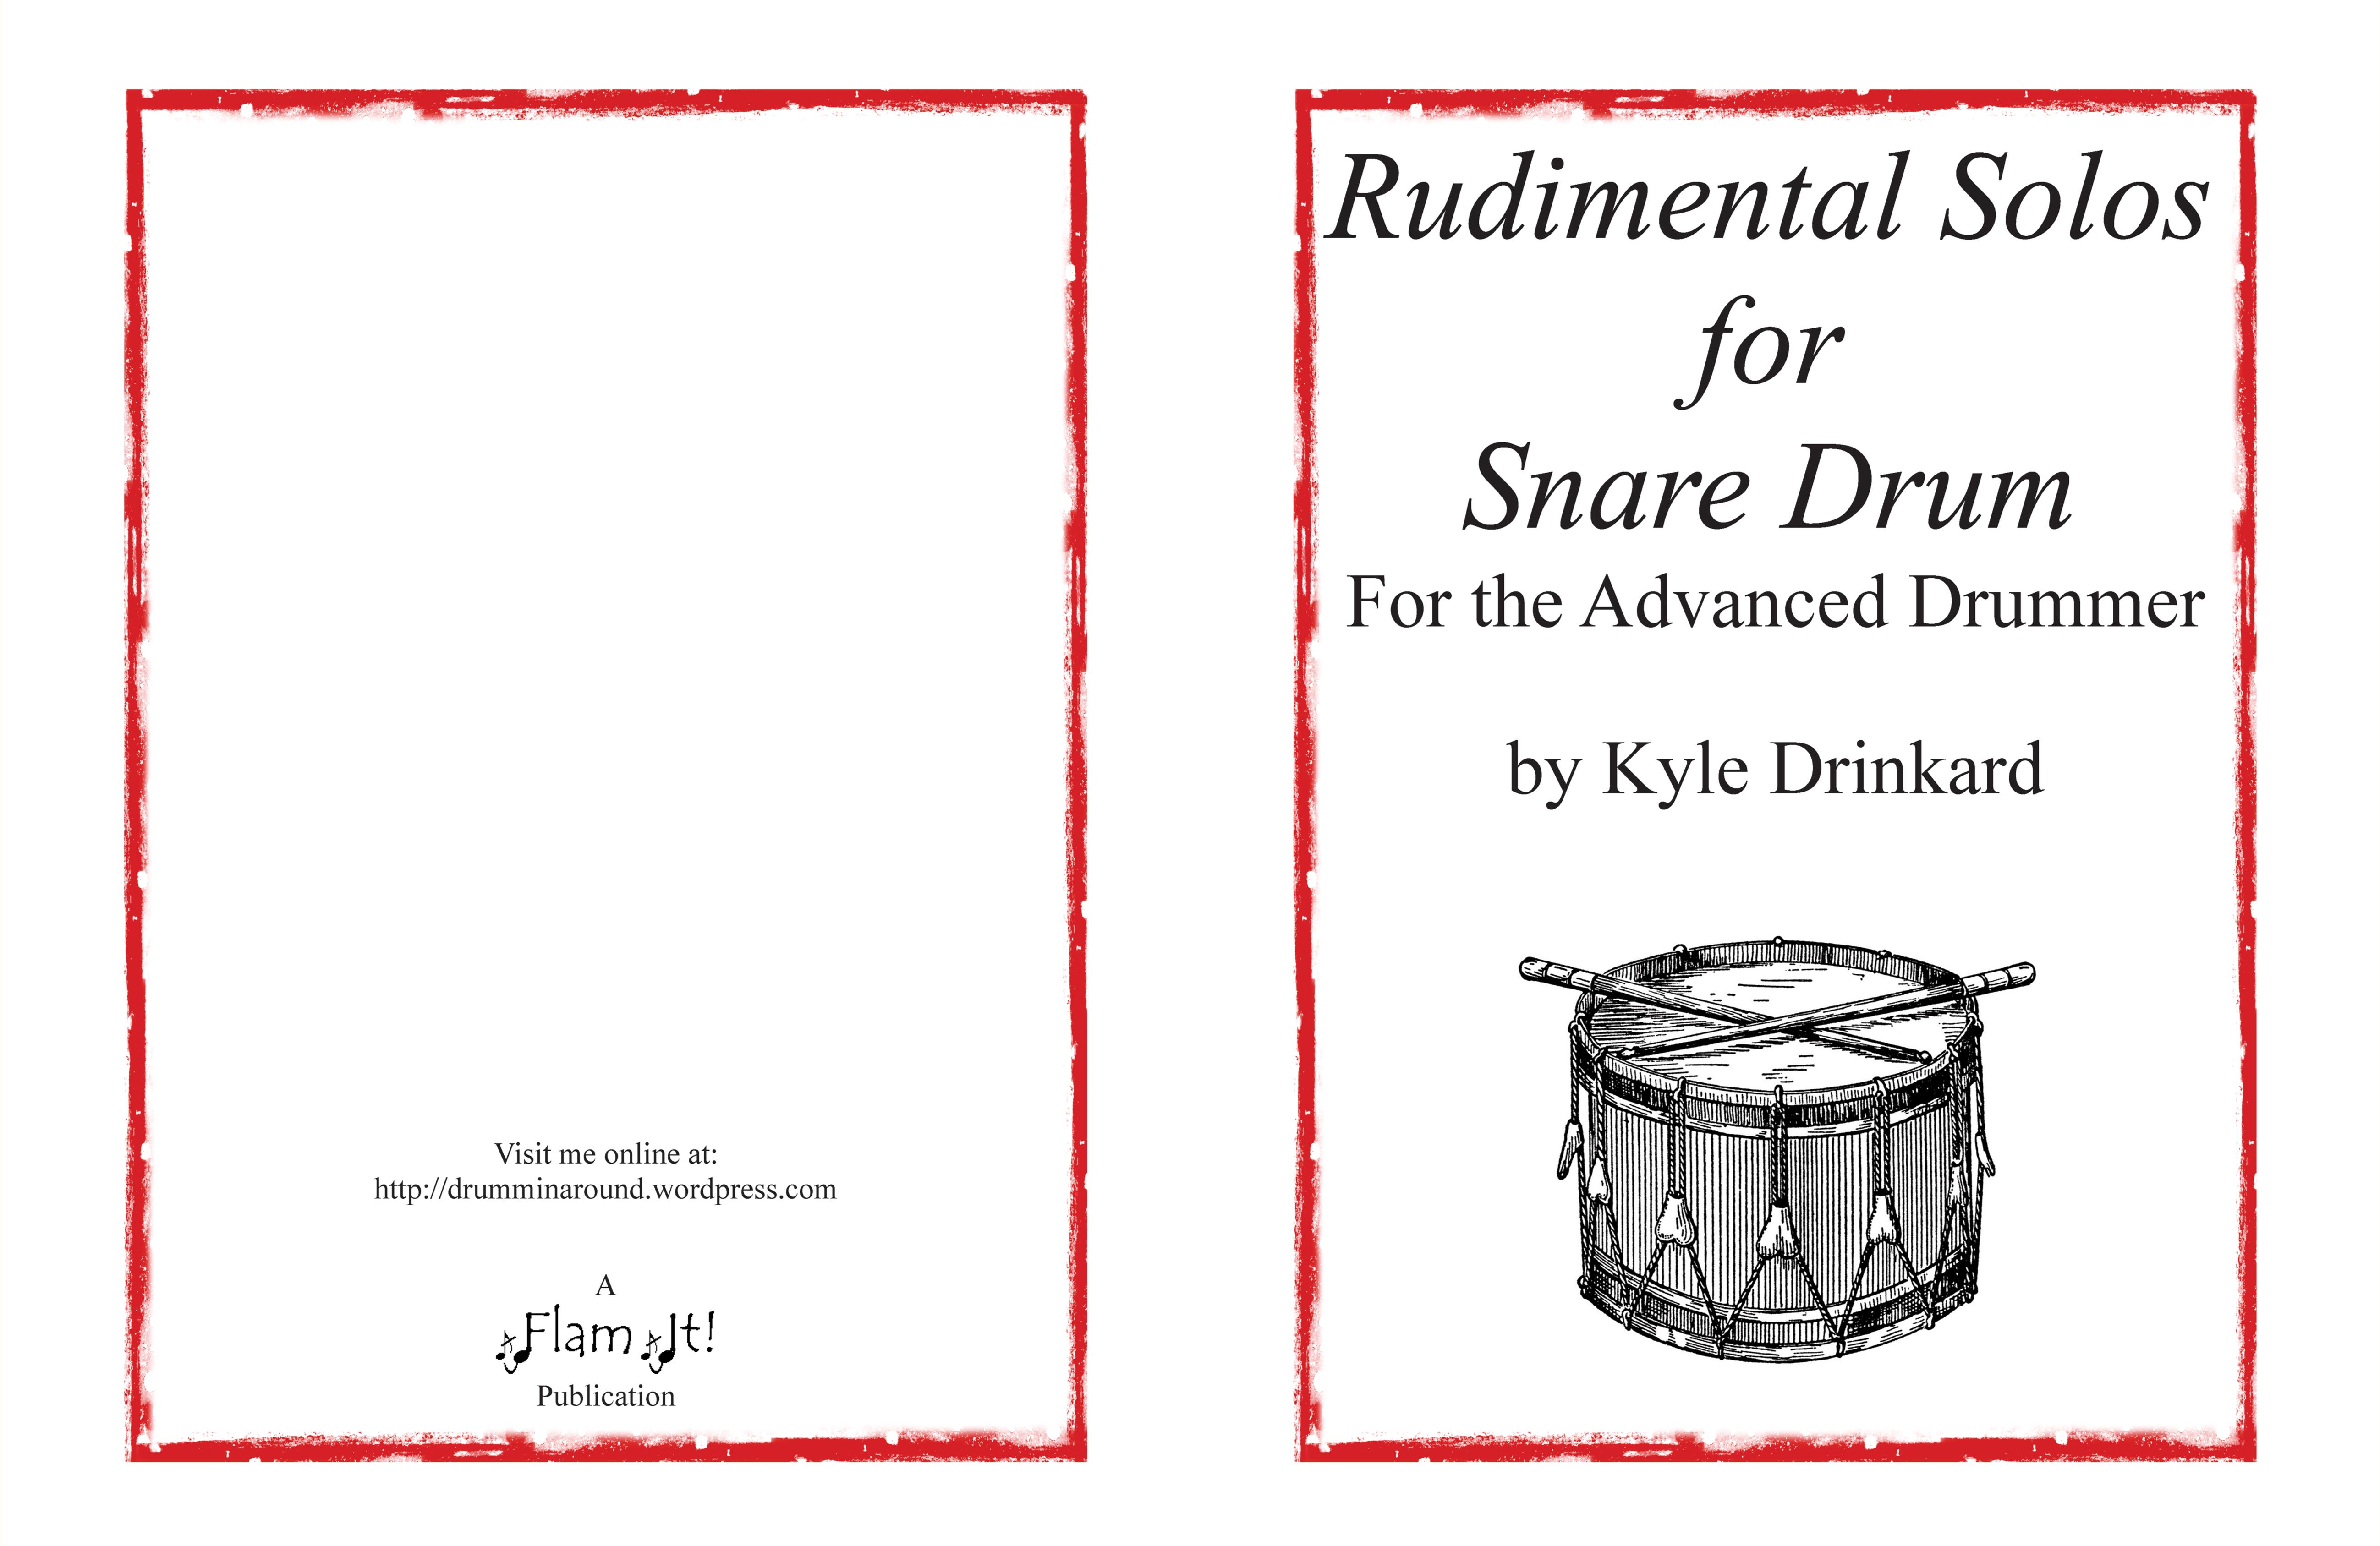 Rudimental Solos for Snare Drum for the Advanced Drummer cover image